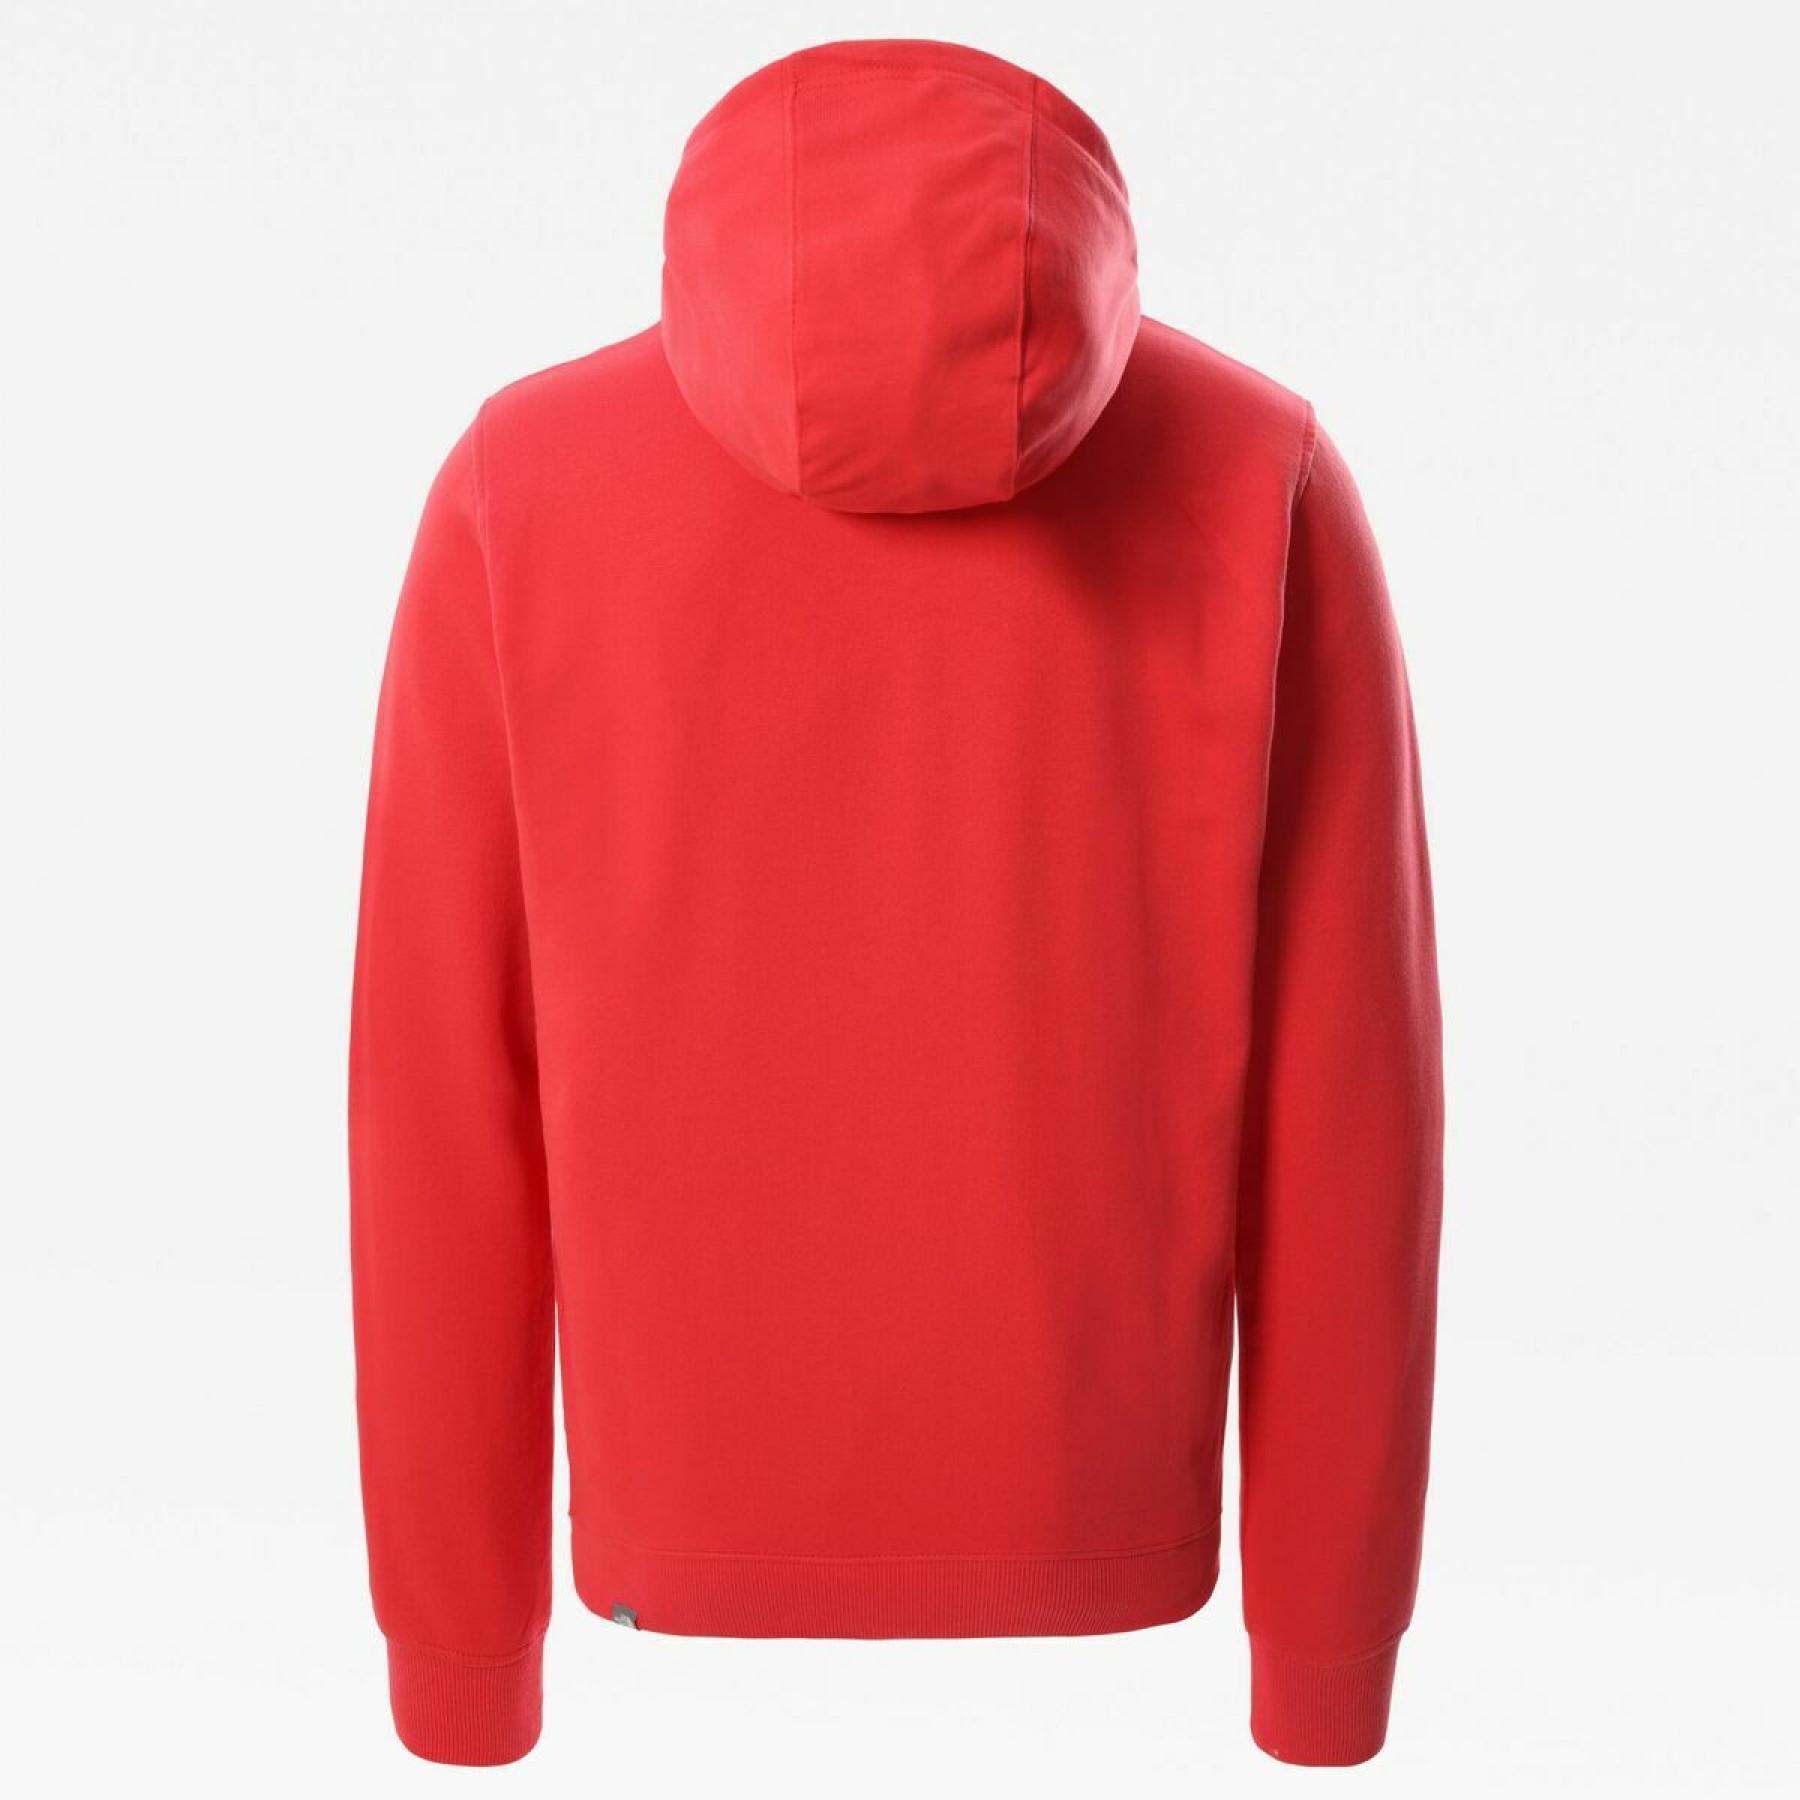 Hooded sweatshirt The North Face Léger Drew